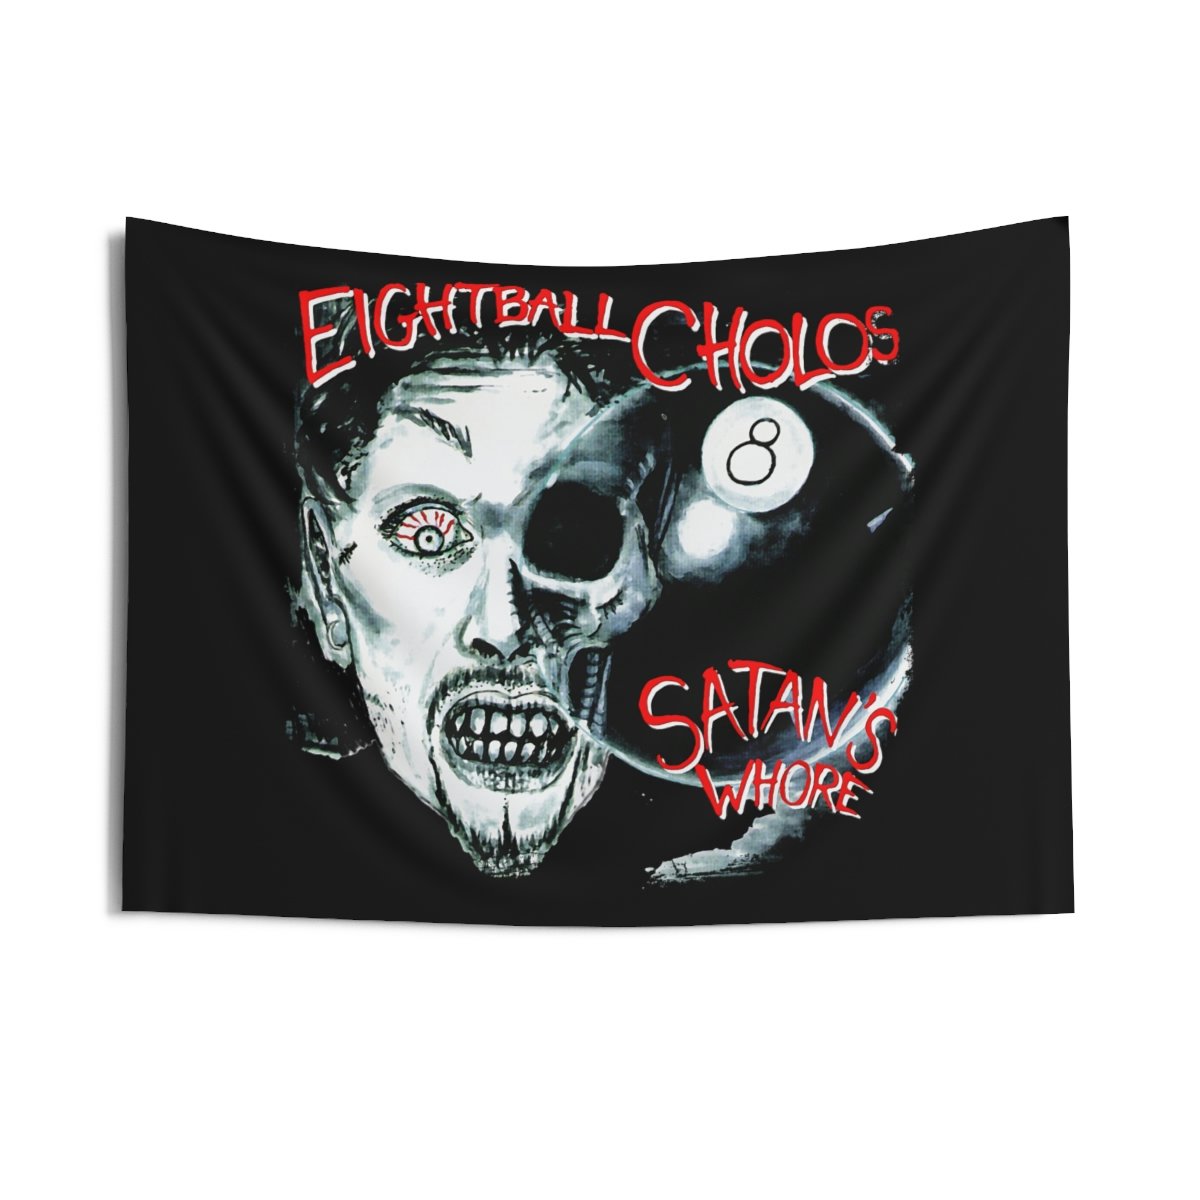 Eightball Cholos – Satan’s Whore Indoor Wall Tapestries